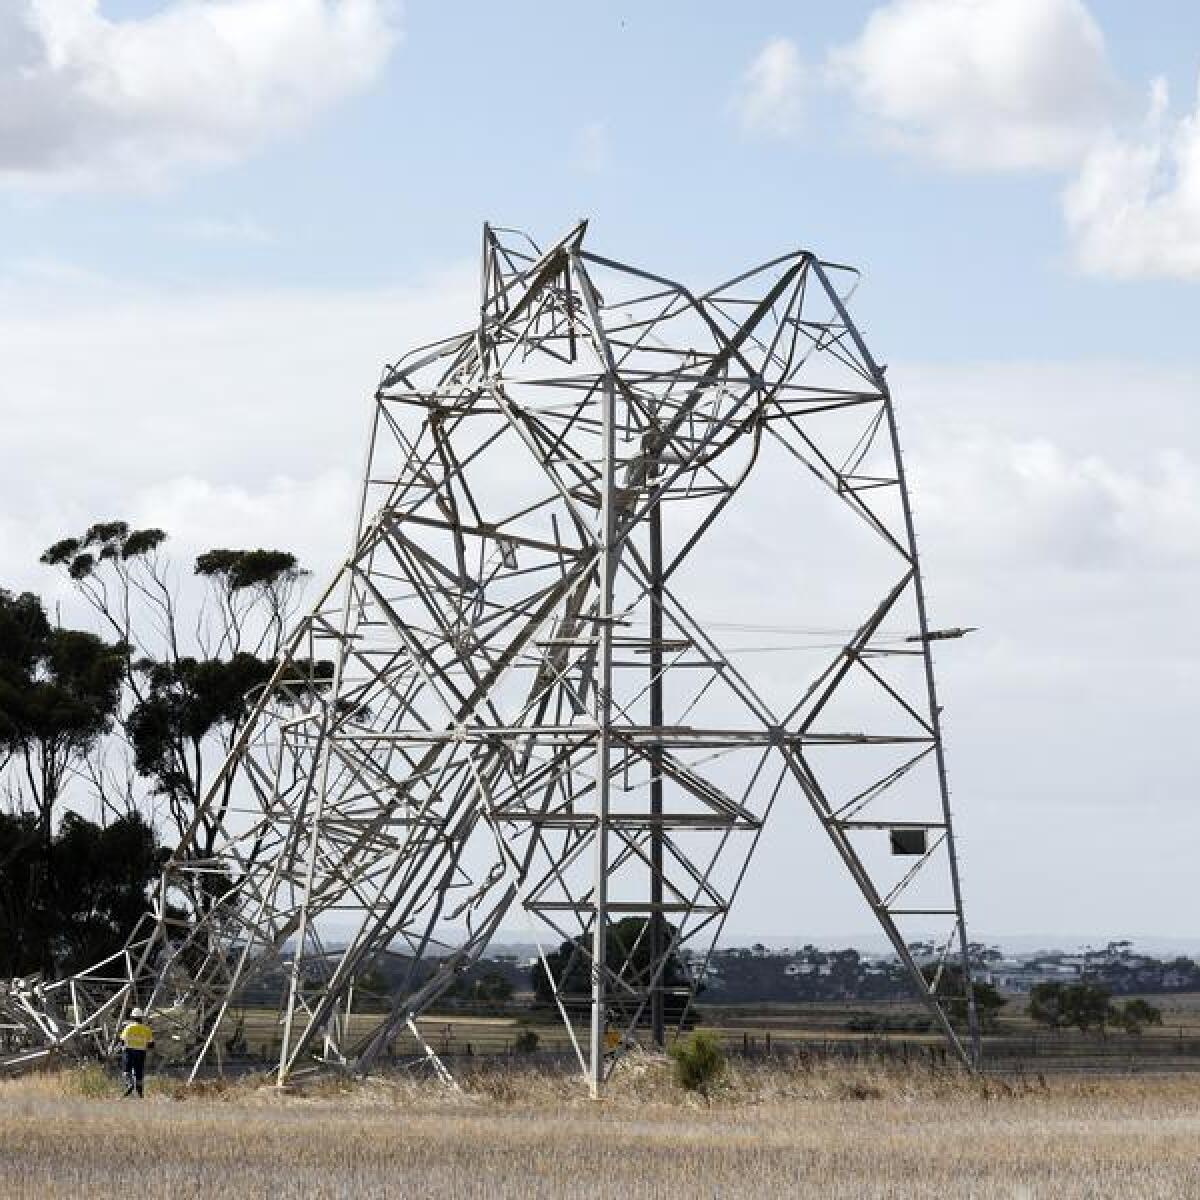 A transmission tower damaged in the storms two weeks ago.